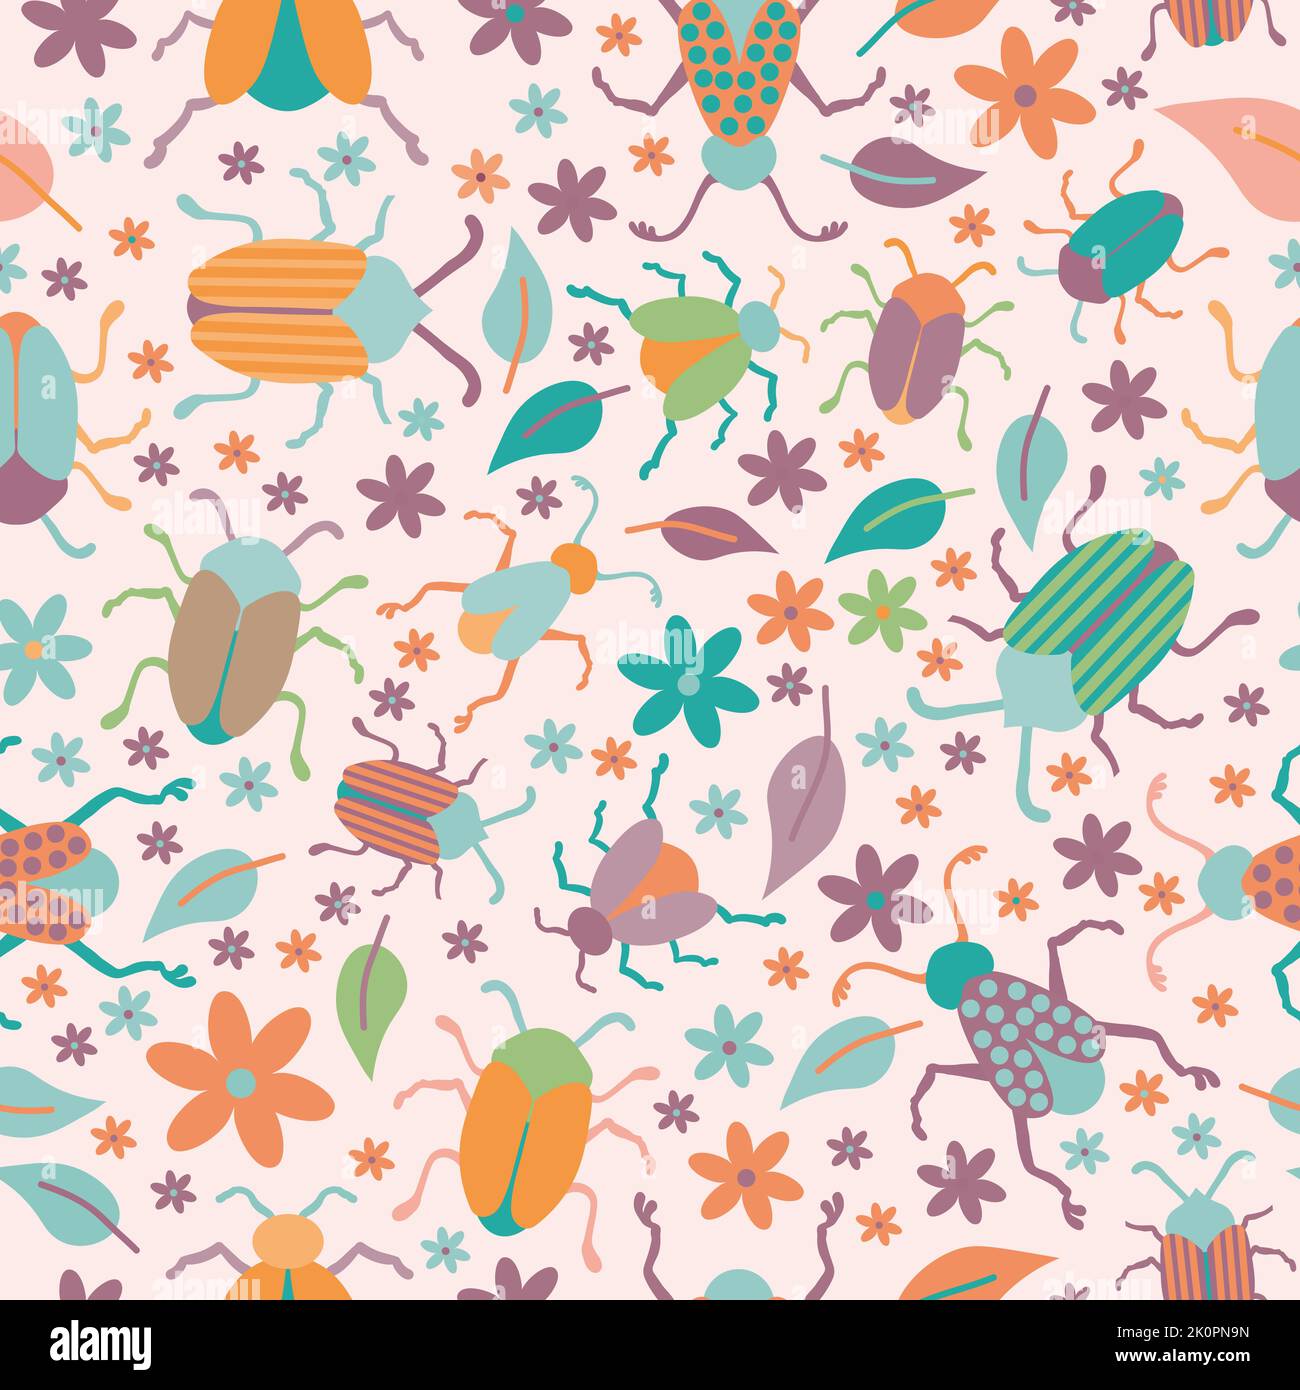 Bugs, leaves and flowers seamless pattern Stock Vector